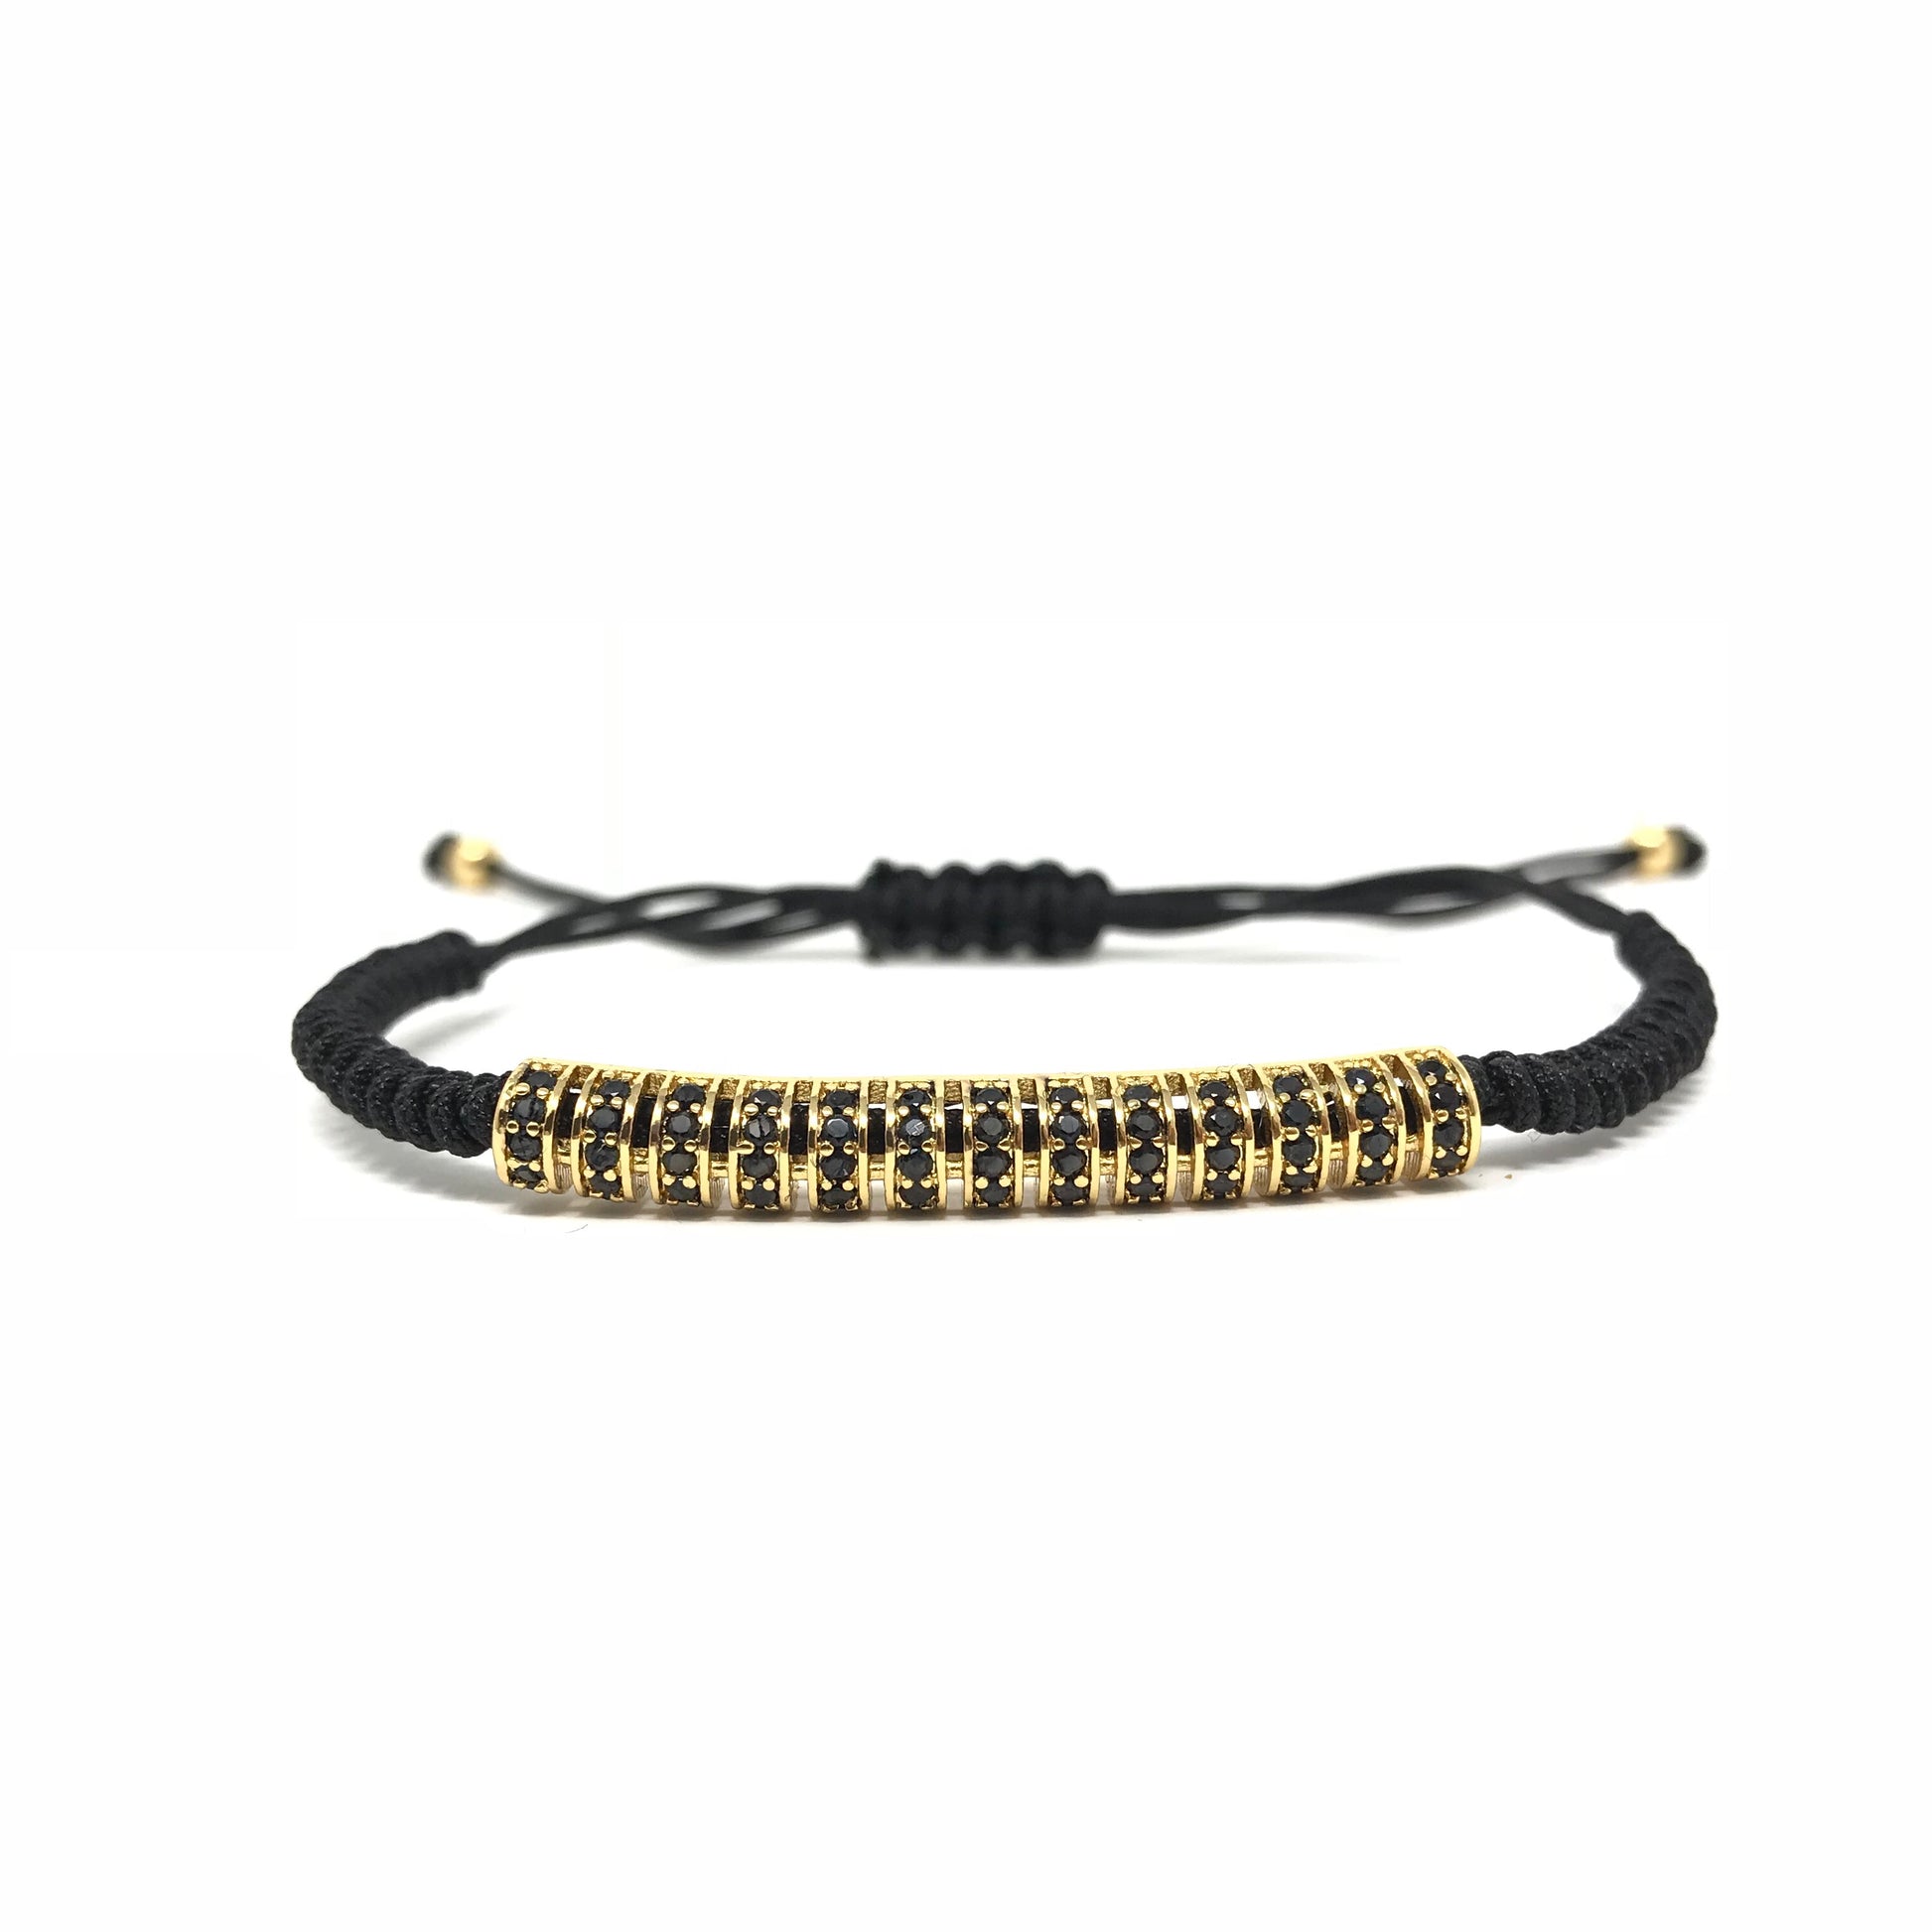 Riviere Bracelet - Retail Therapy Jewelry